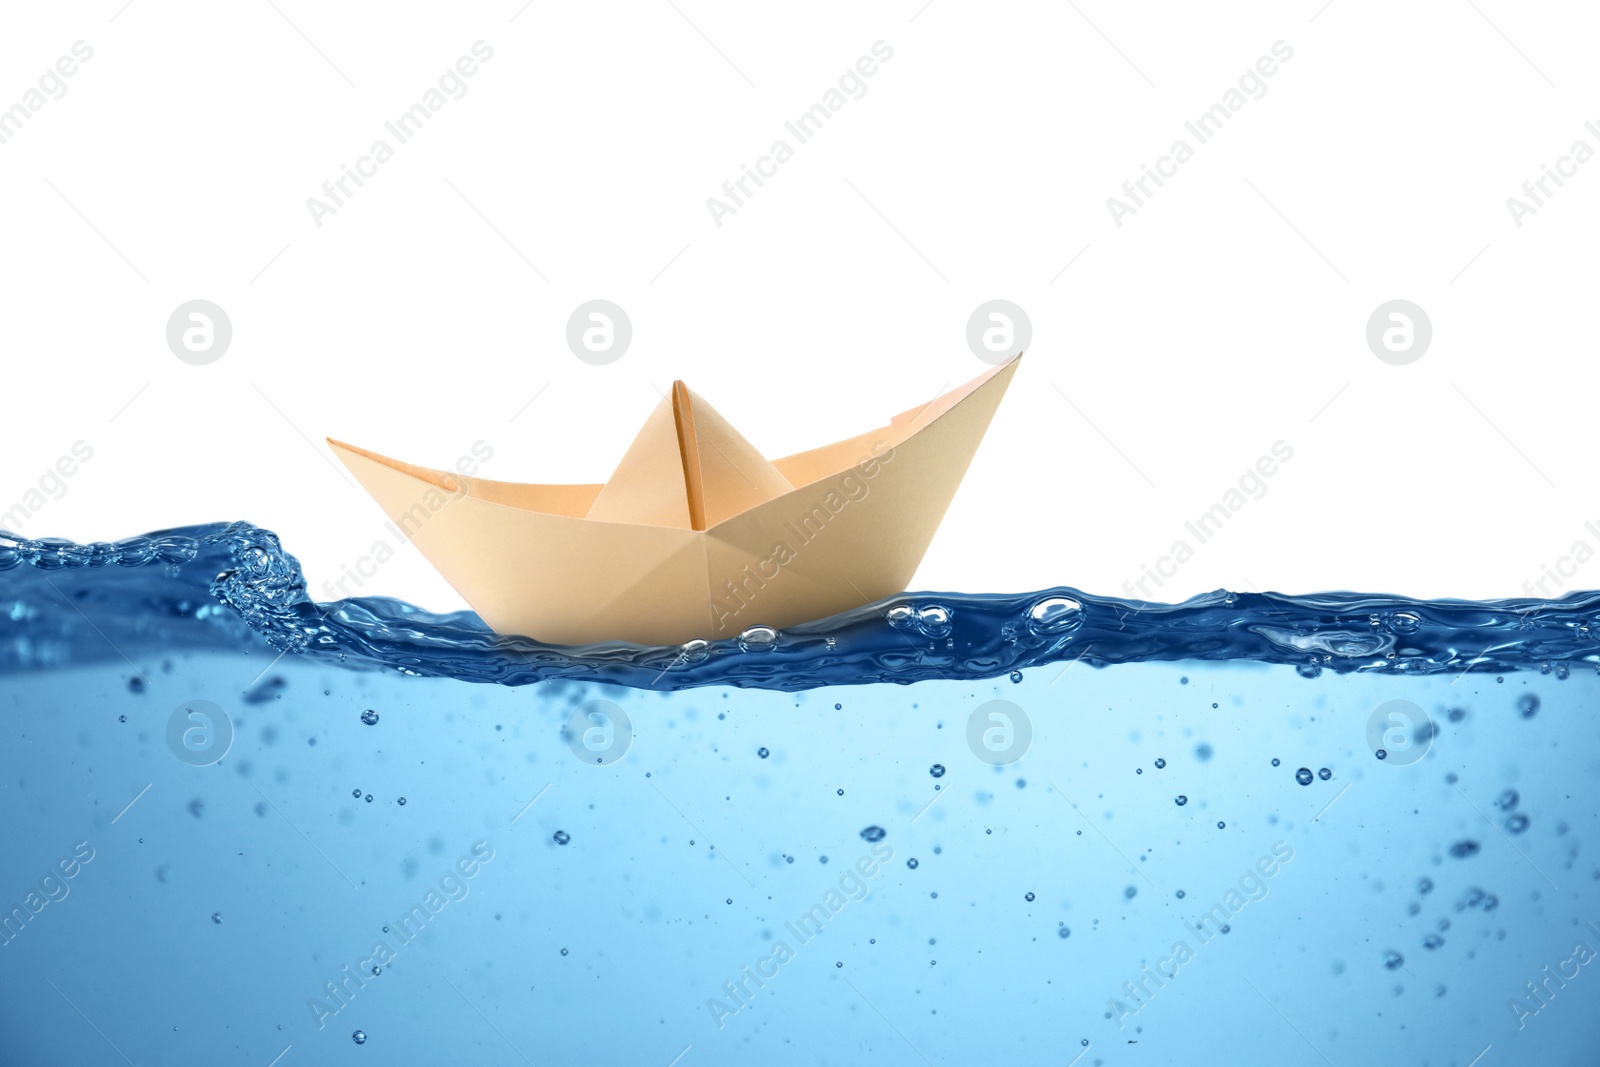 Image of Handmade beige paper boat floating on clear water against white background 